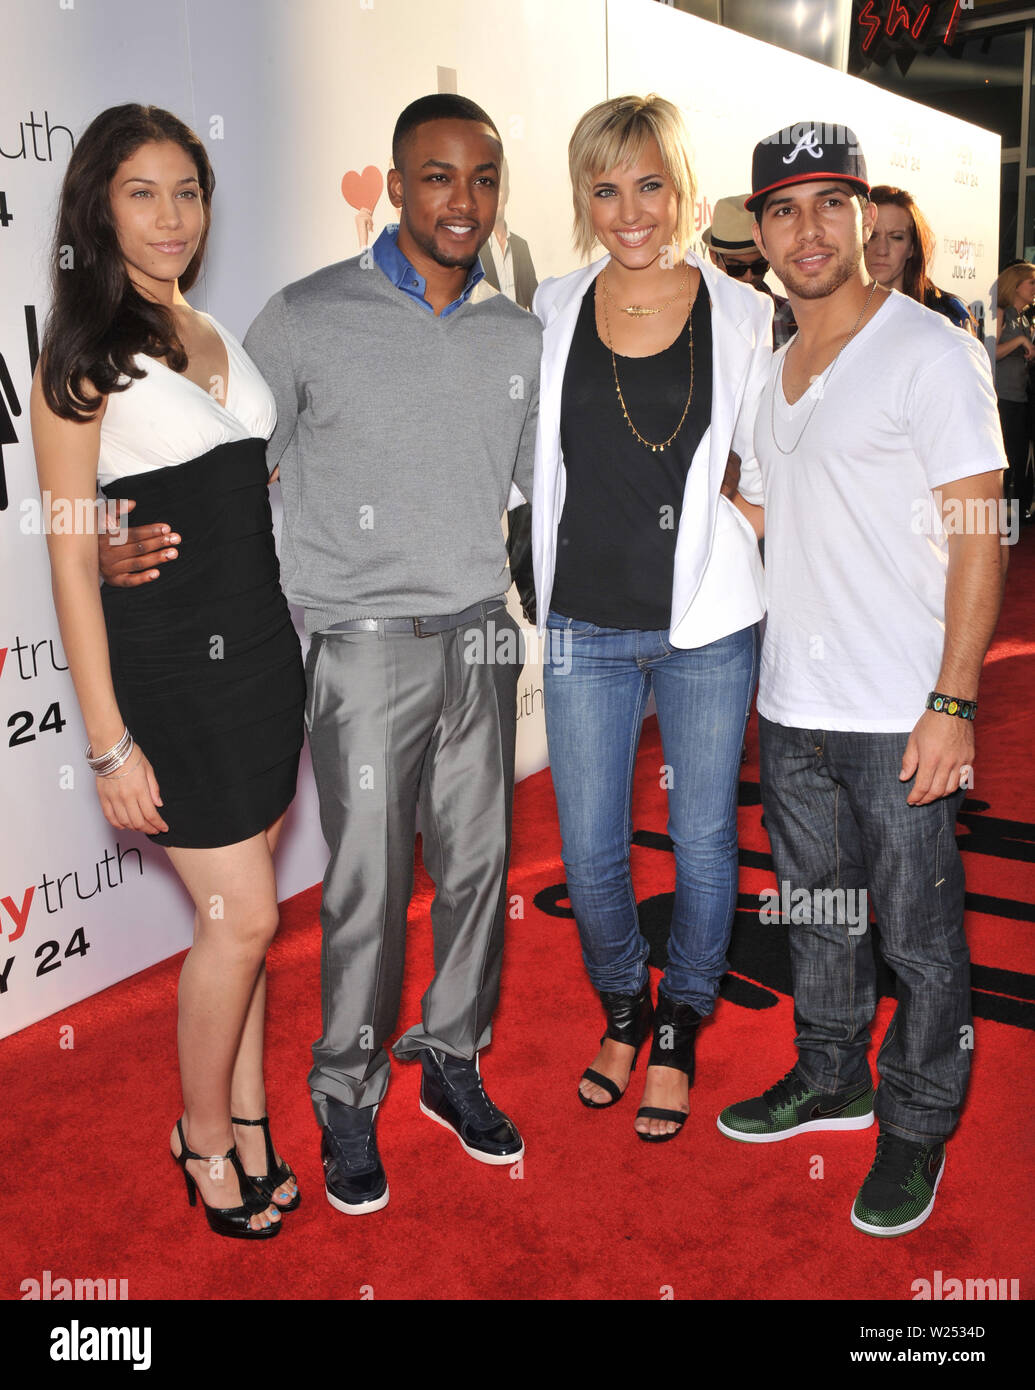 LOS ANGELES, CA. July 16, 2009: Fame stars Kristy Flores, Collins Pennie, Kherington Payne & Walter Perez at the premiere of 'The Ugly Truth' at the Cinerama Dome, Hollywood. © 2009 Paul Smith / Featureflash Stock Photo